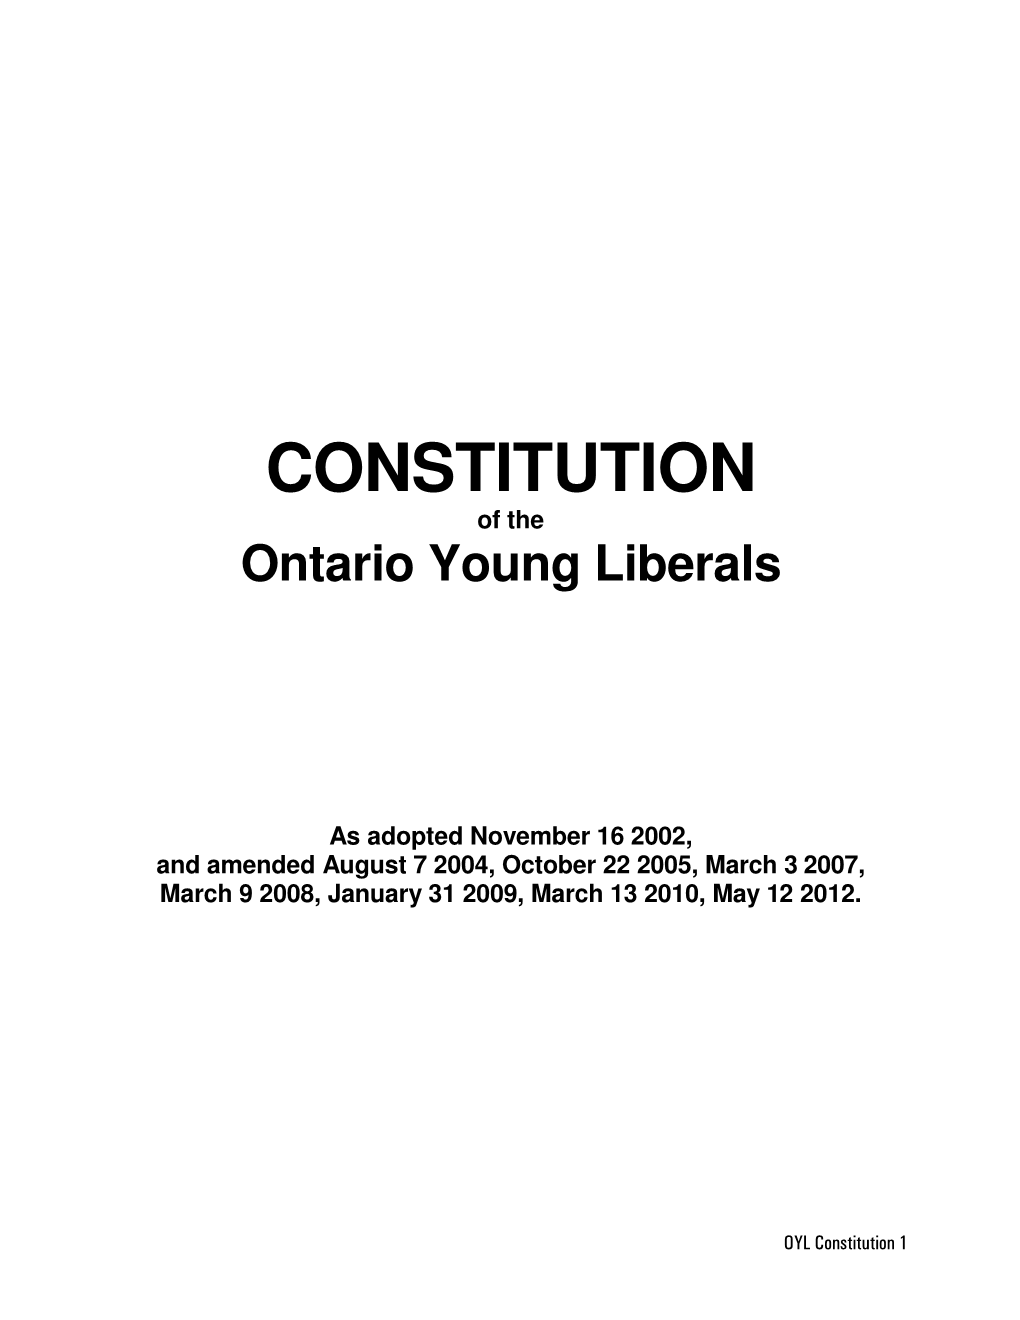 CONSTITUTION of the Ontario Young Liberals